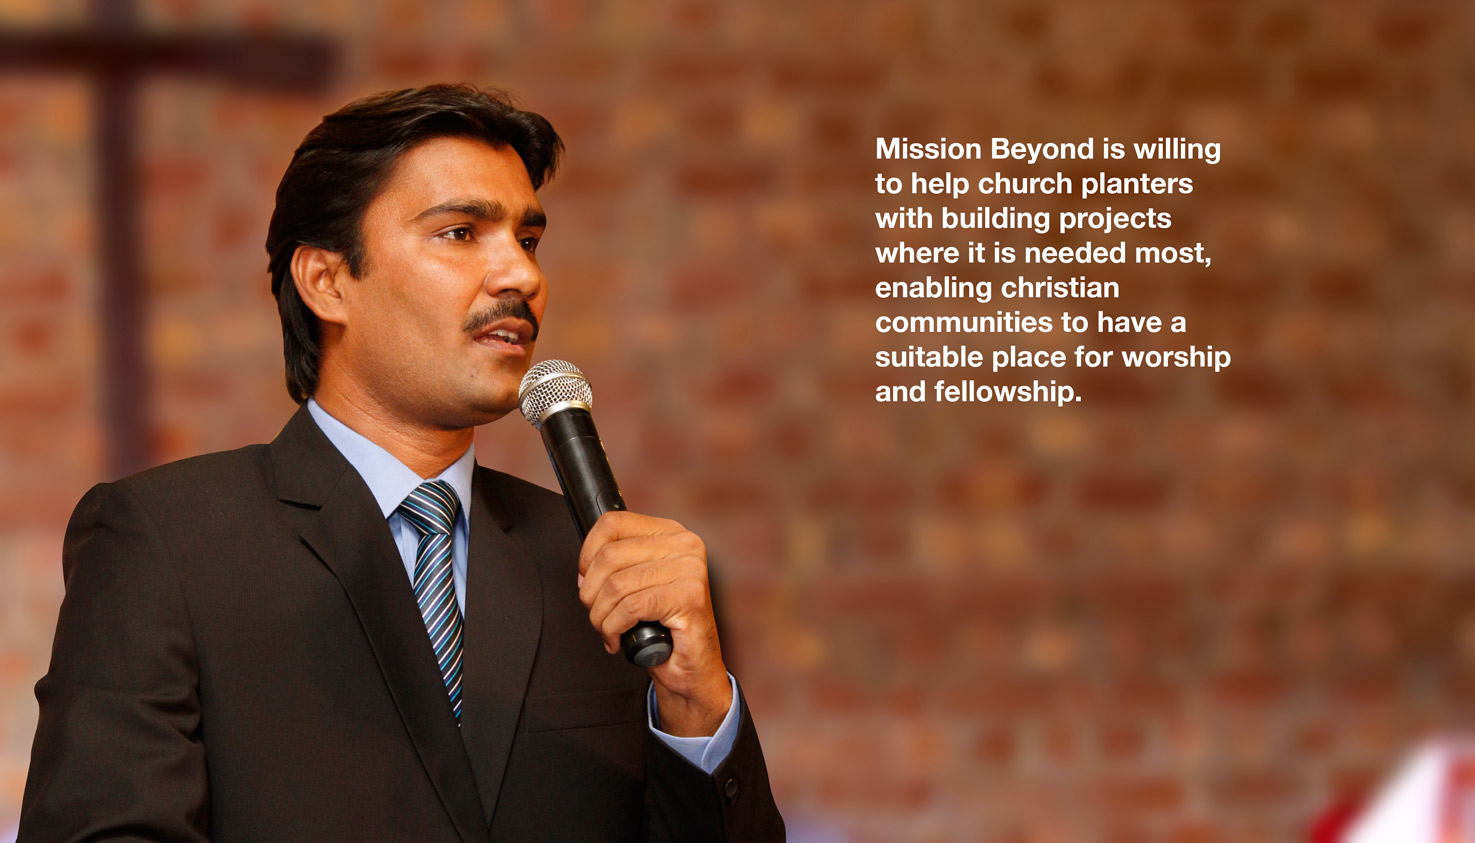 Mission Beyond is willing to help church planters with building projects where it is needed most, enabling christian communities to have a suitable place for worship and fellowship.